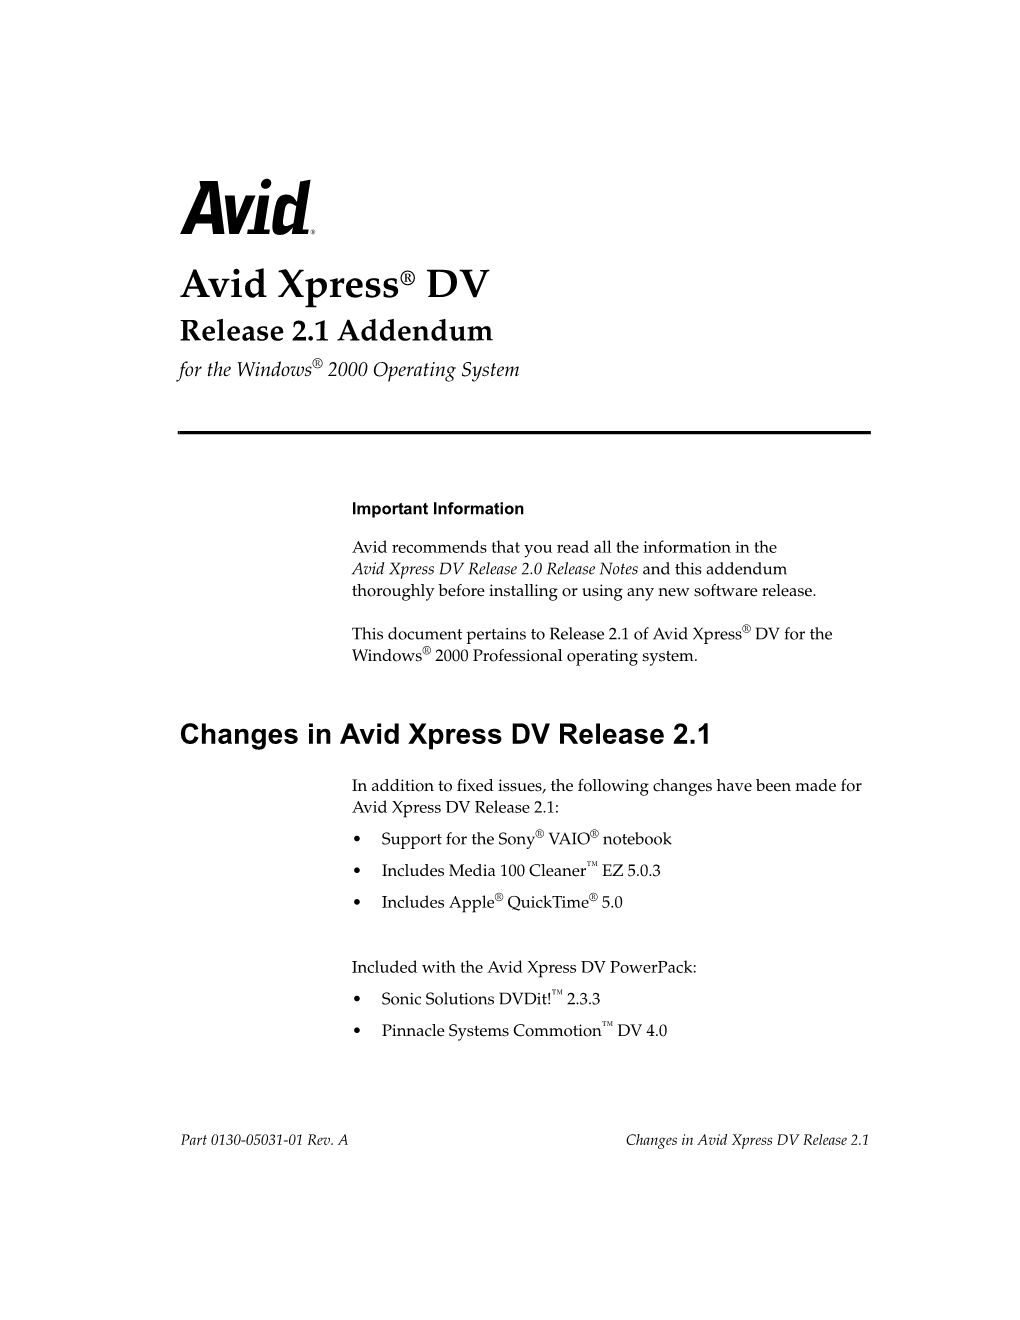 Avid Xpress® DV for the Windows® 2000 Professional Operating System